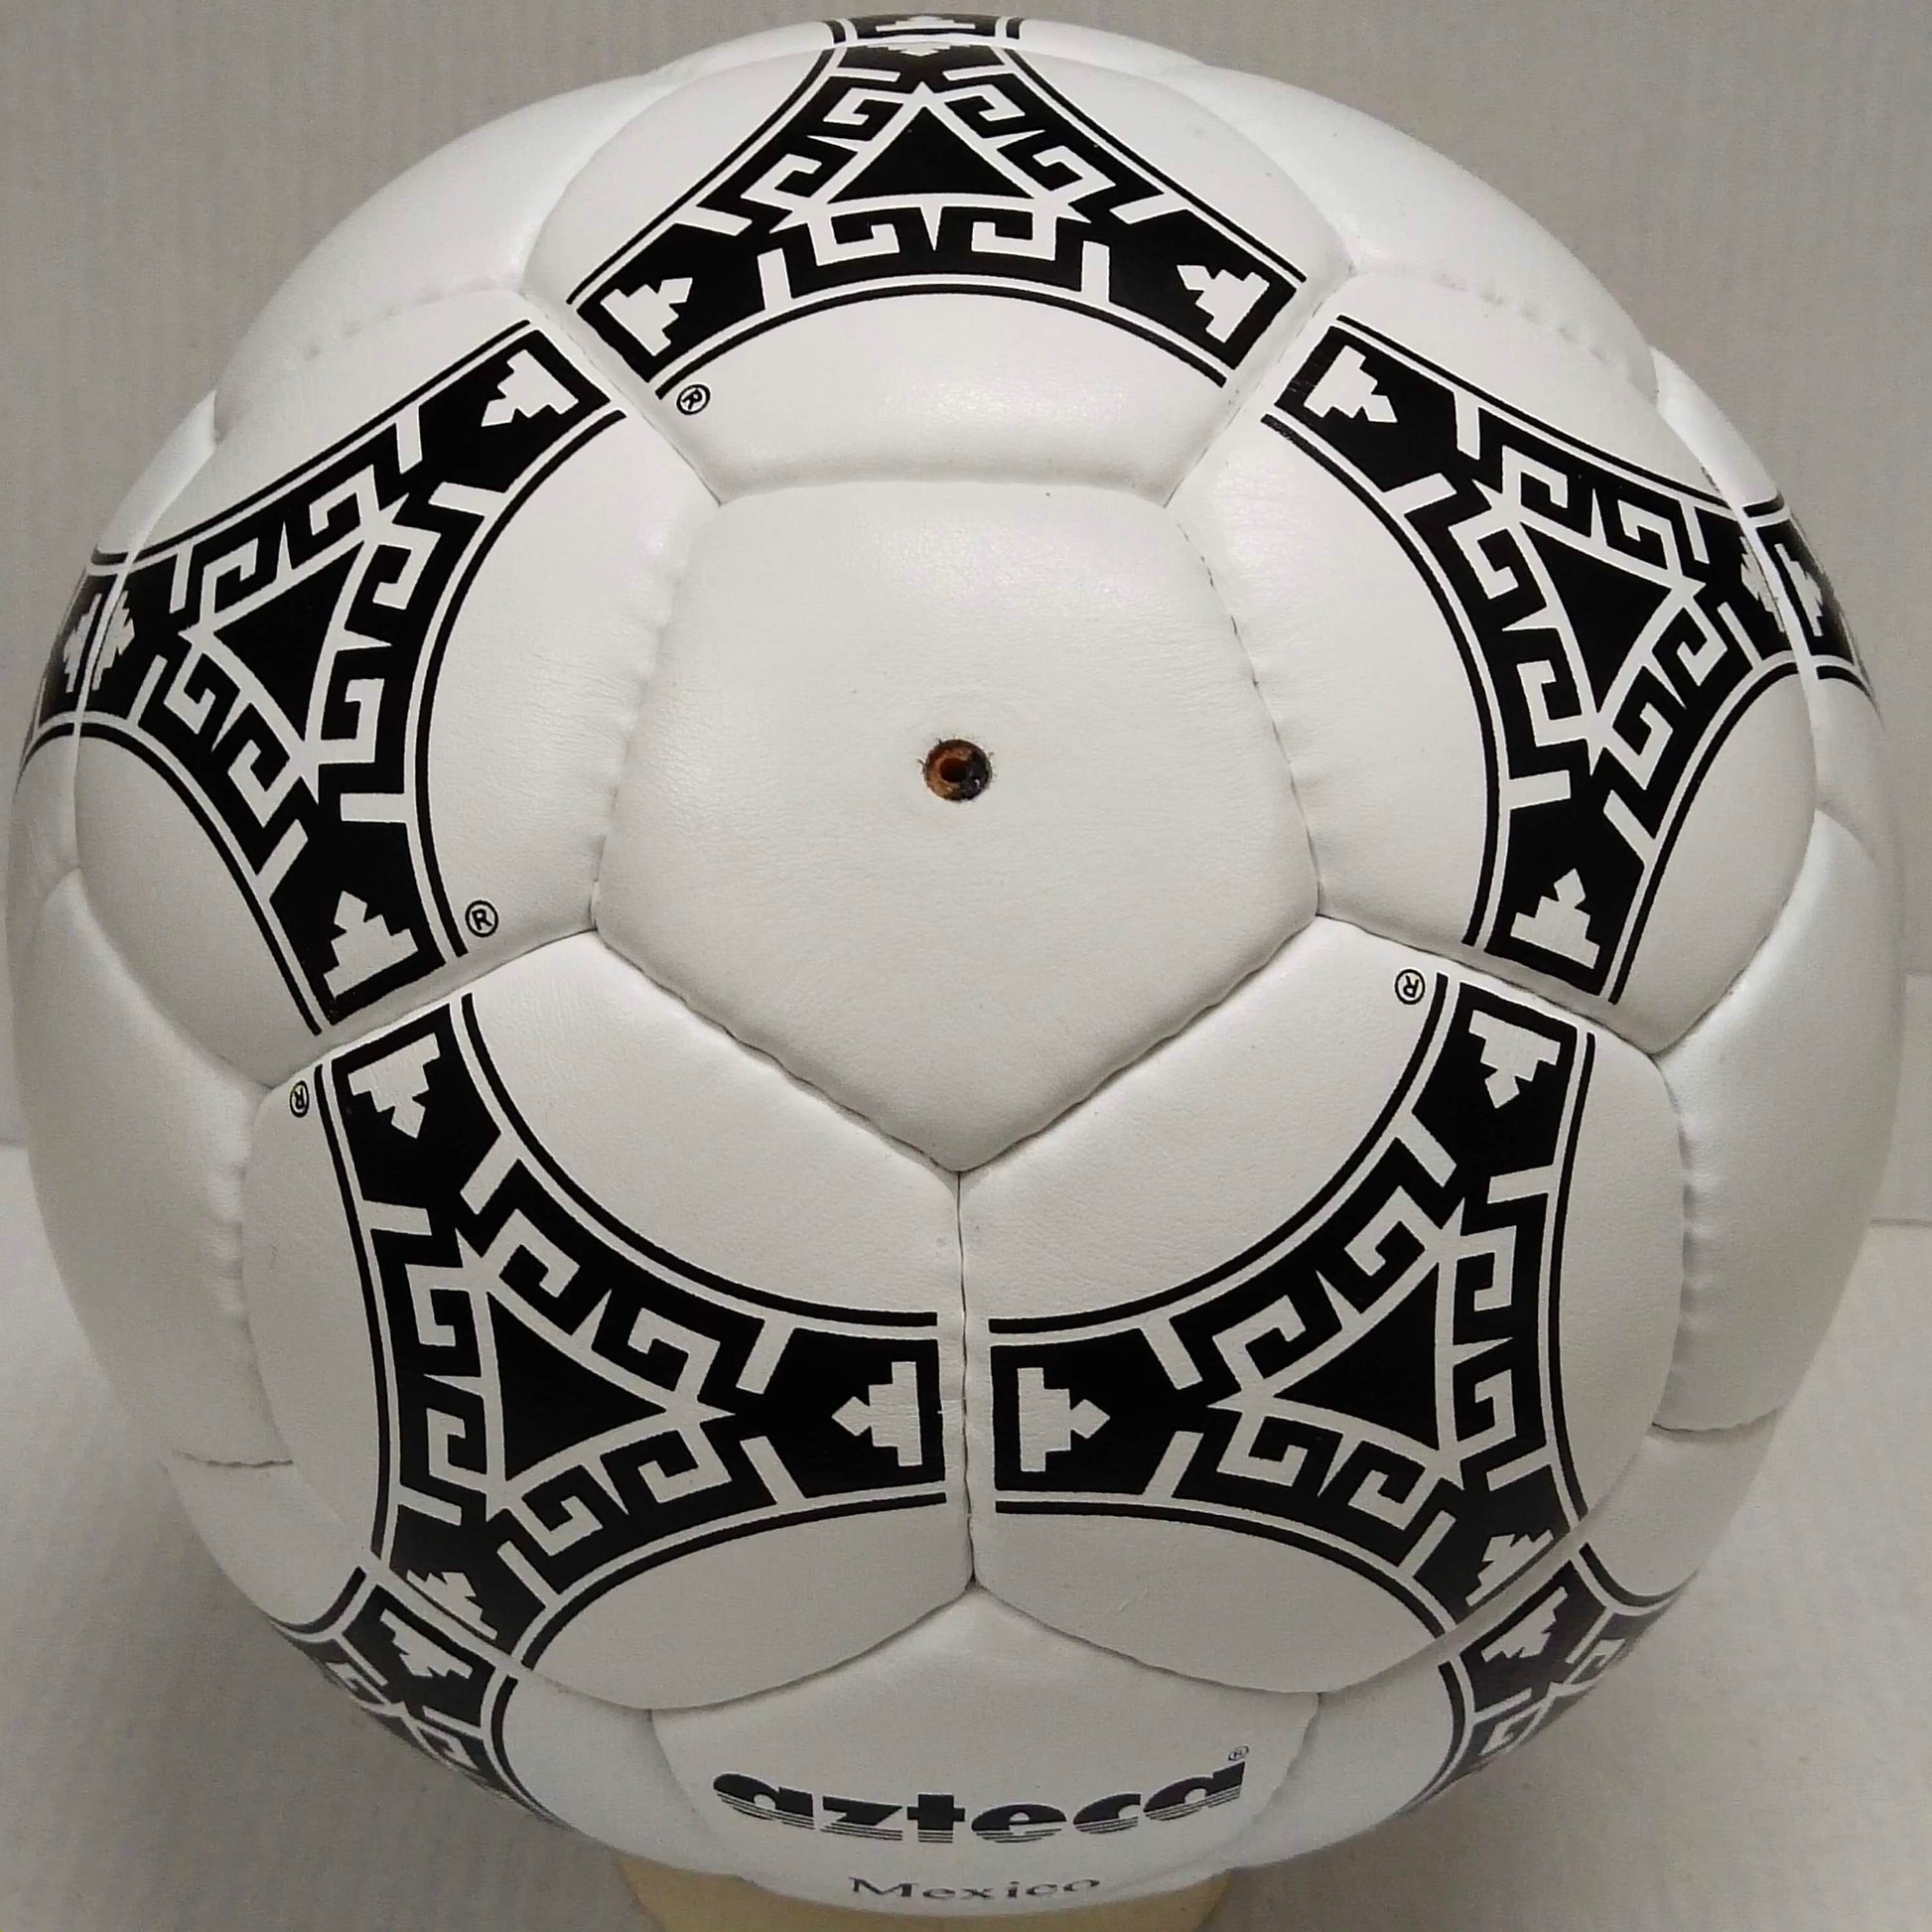 Adidas Azteca Mexico | 1986 | FIFA World Cup Ball | Genuine Leather SIZE 5 02